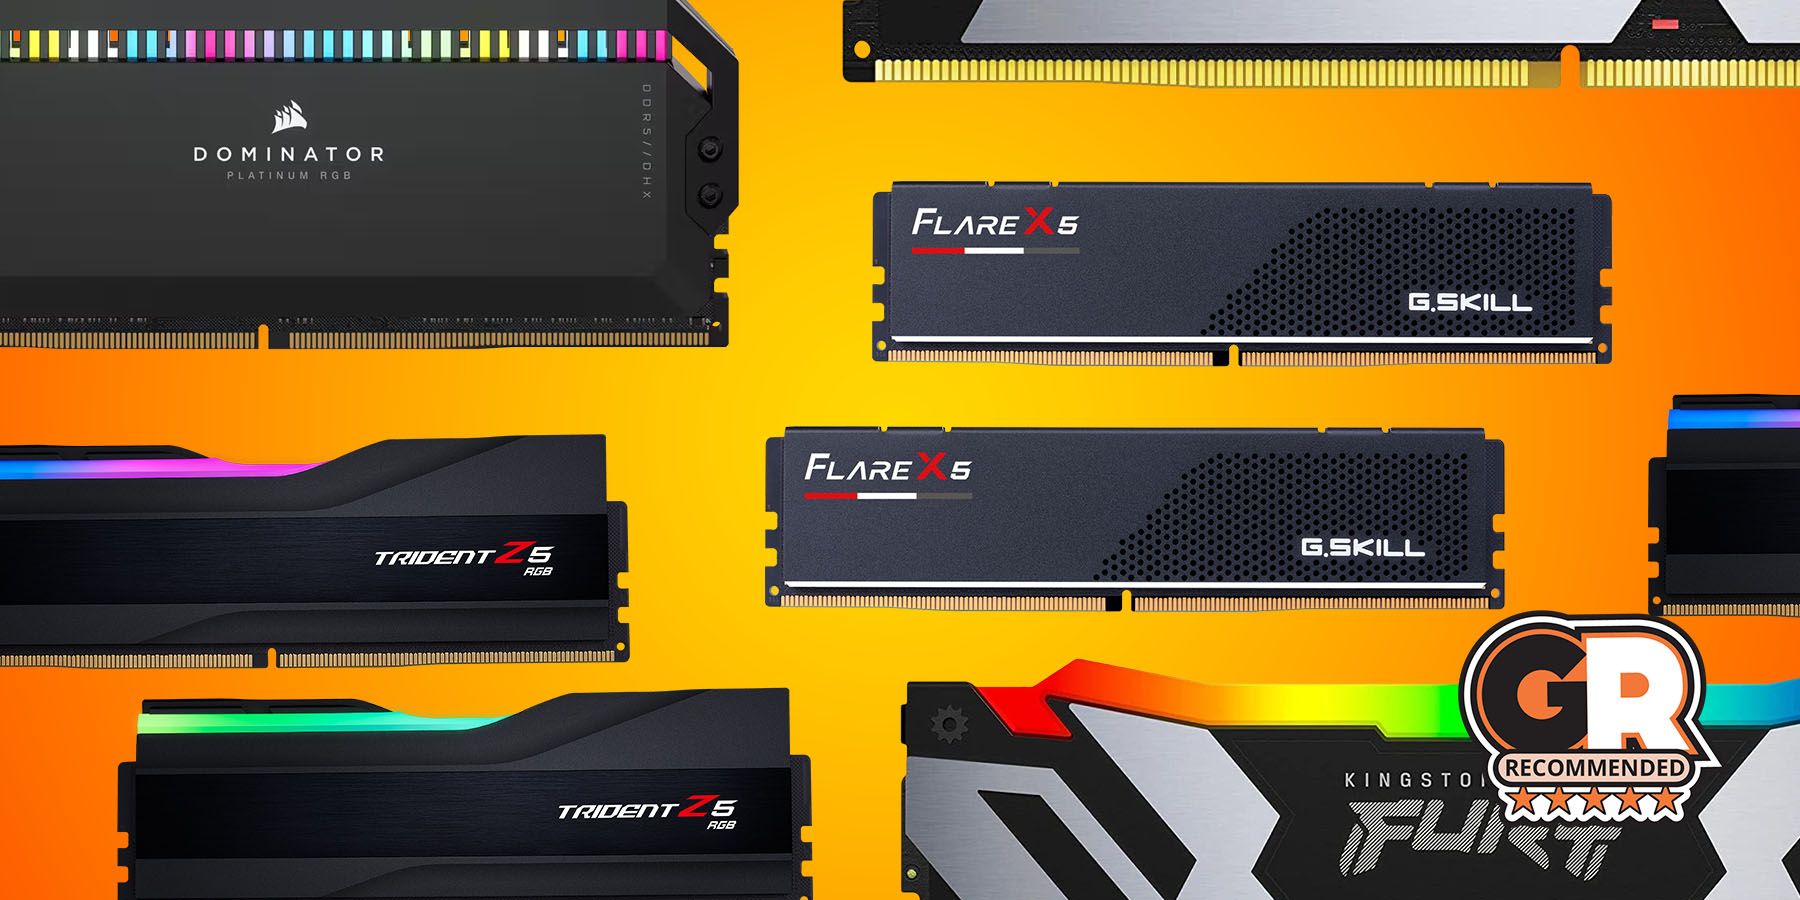 DDR4 vs. DDR5: The Best Memory for PC Gaming